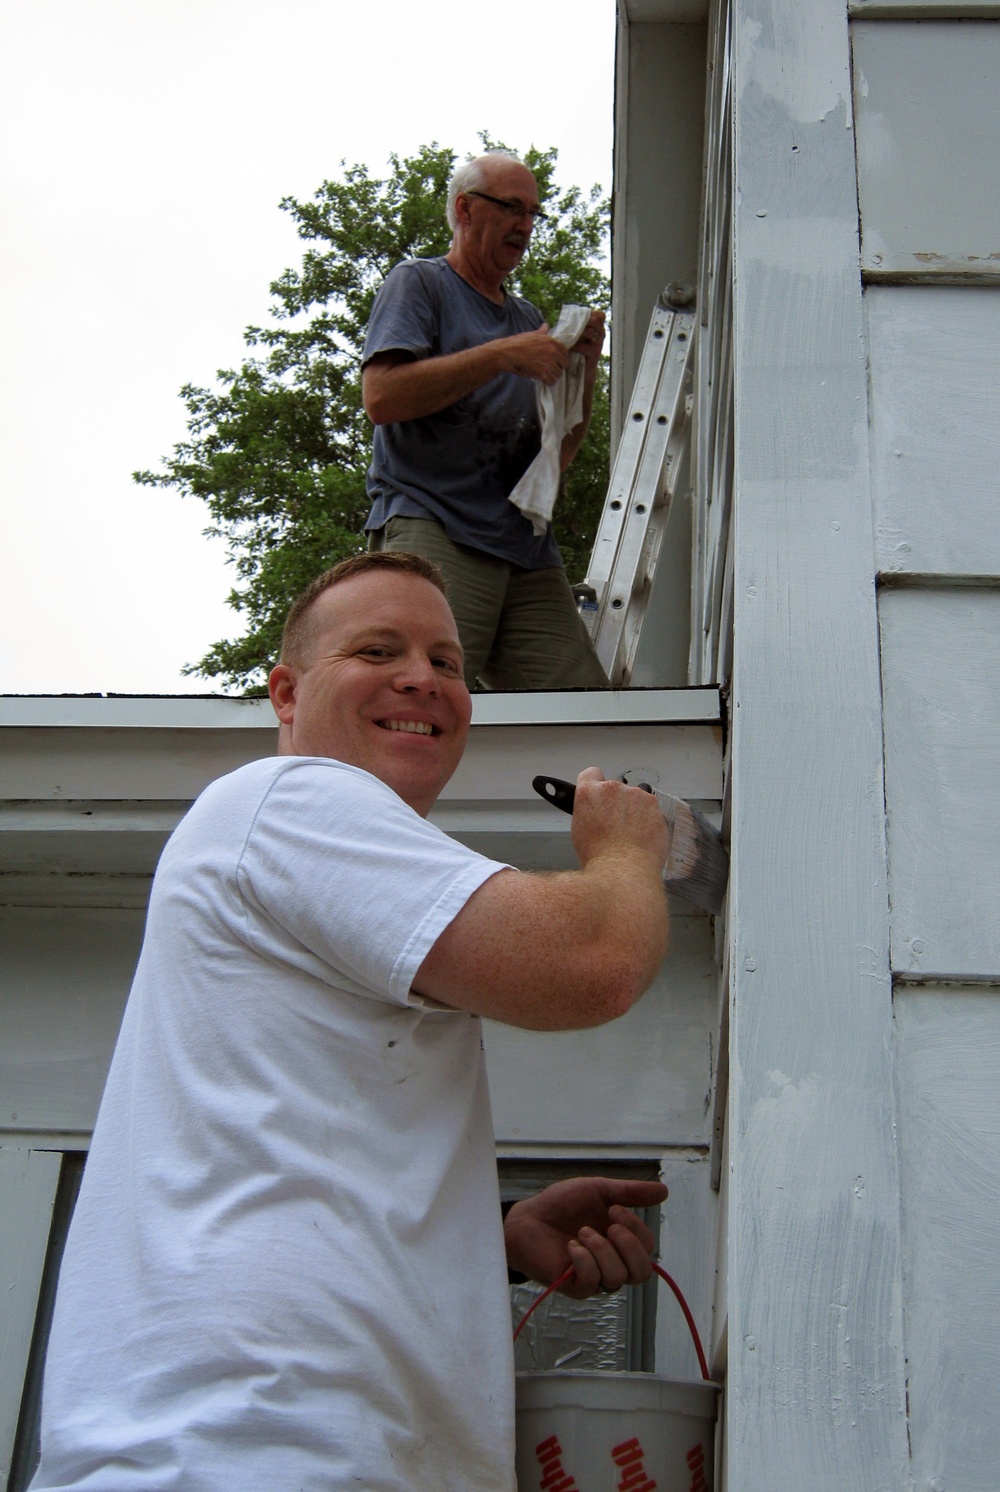 Omaha District Employees volunteer for a better community